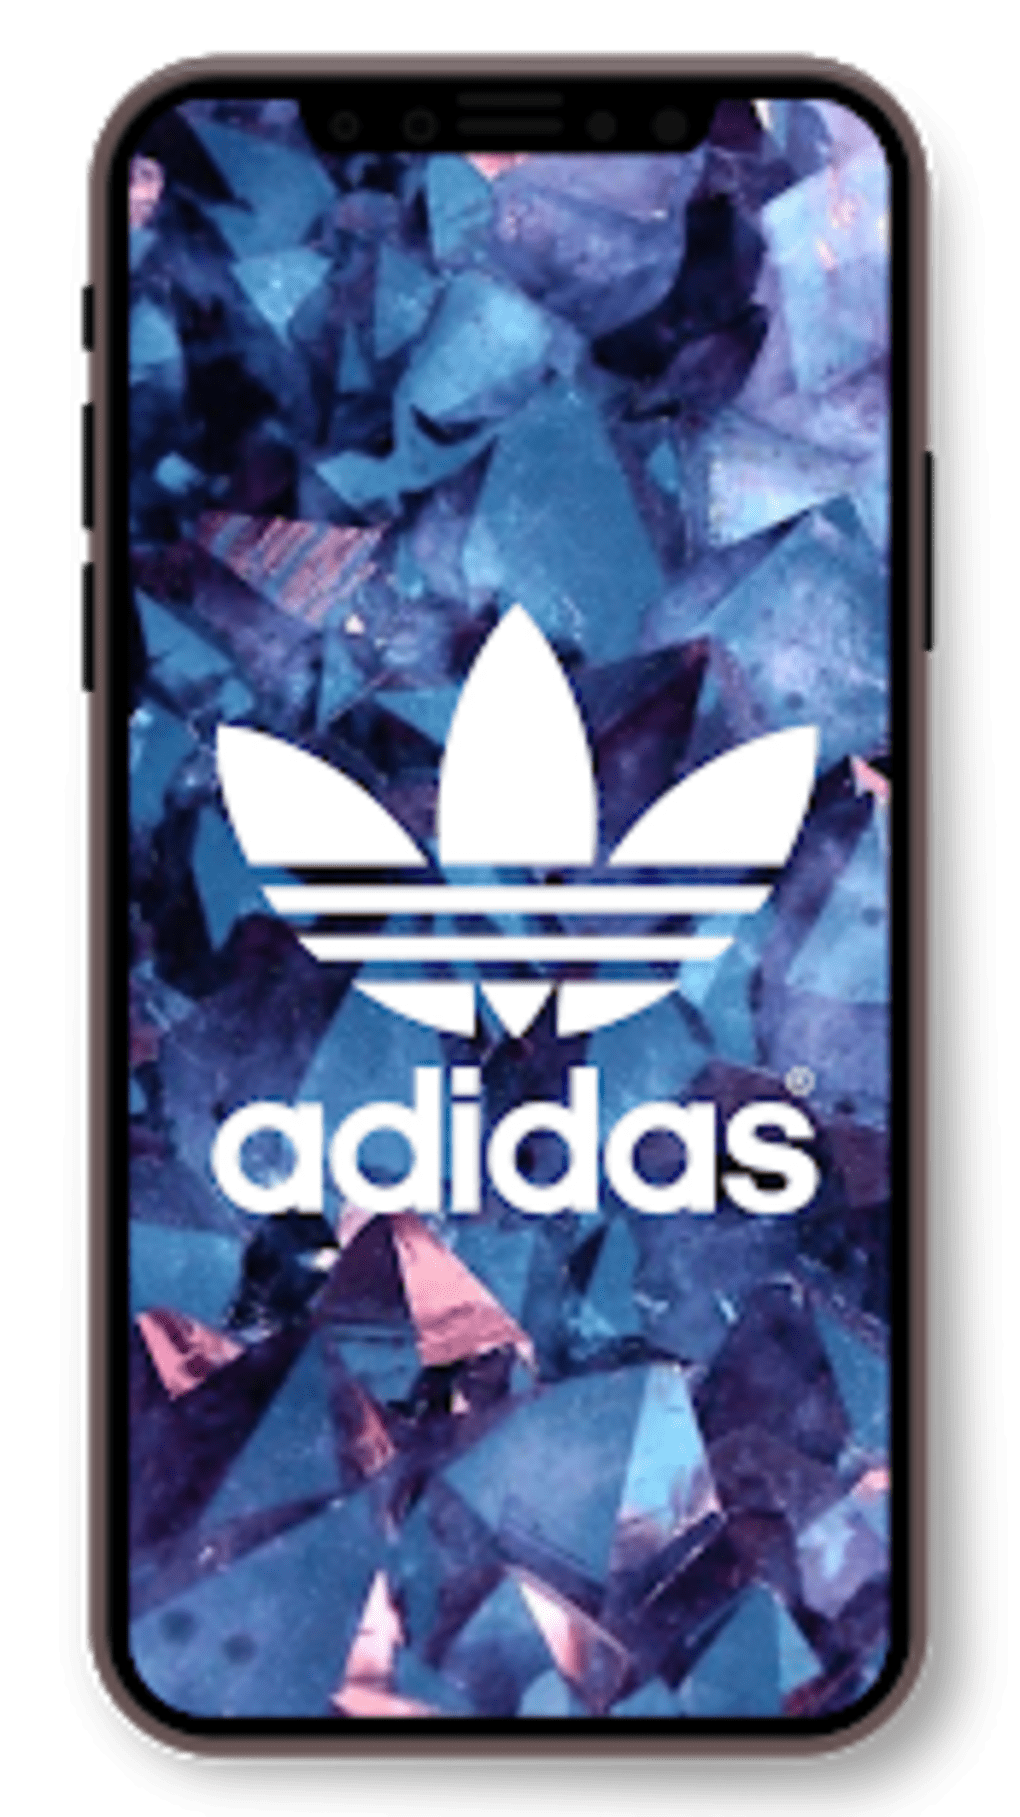 adidas wallpaper,mobile phone case,poster,technology,font,mobile phone accessories